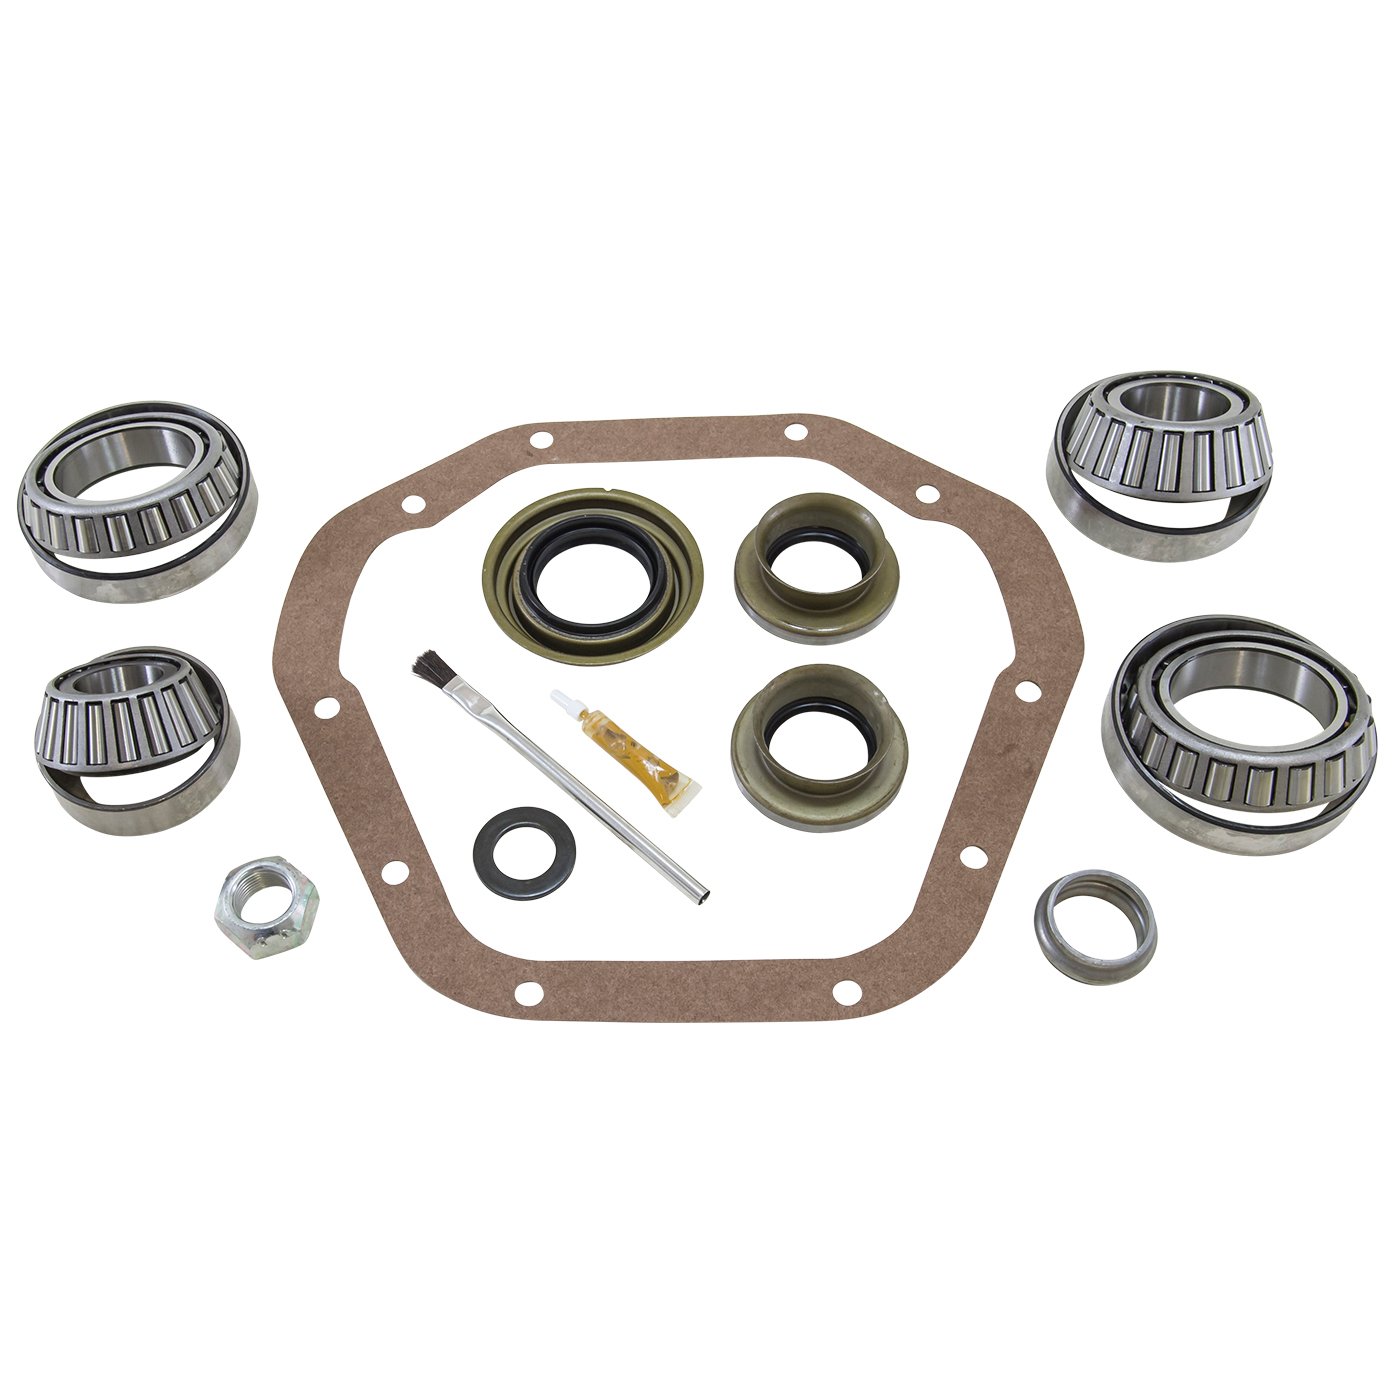 Bearing Install Kit For Dana 50 Ifs Differential